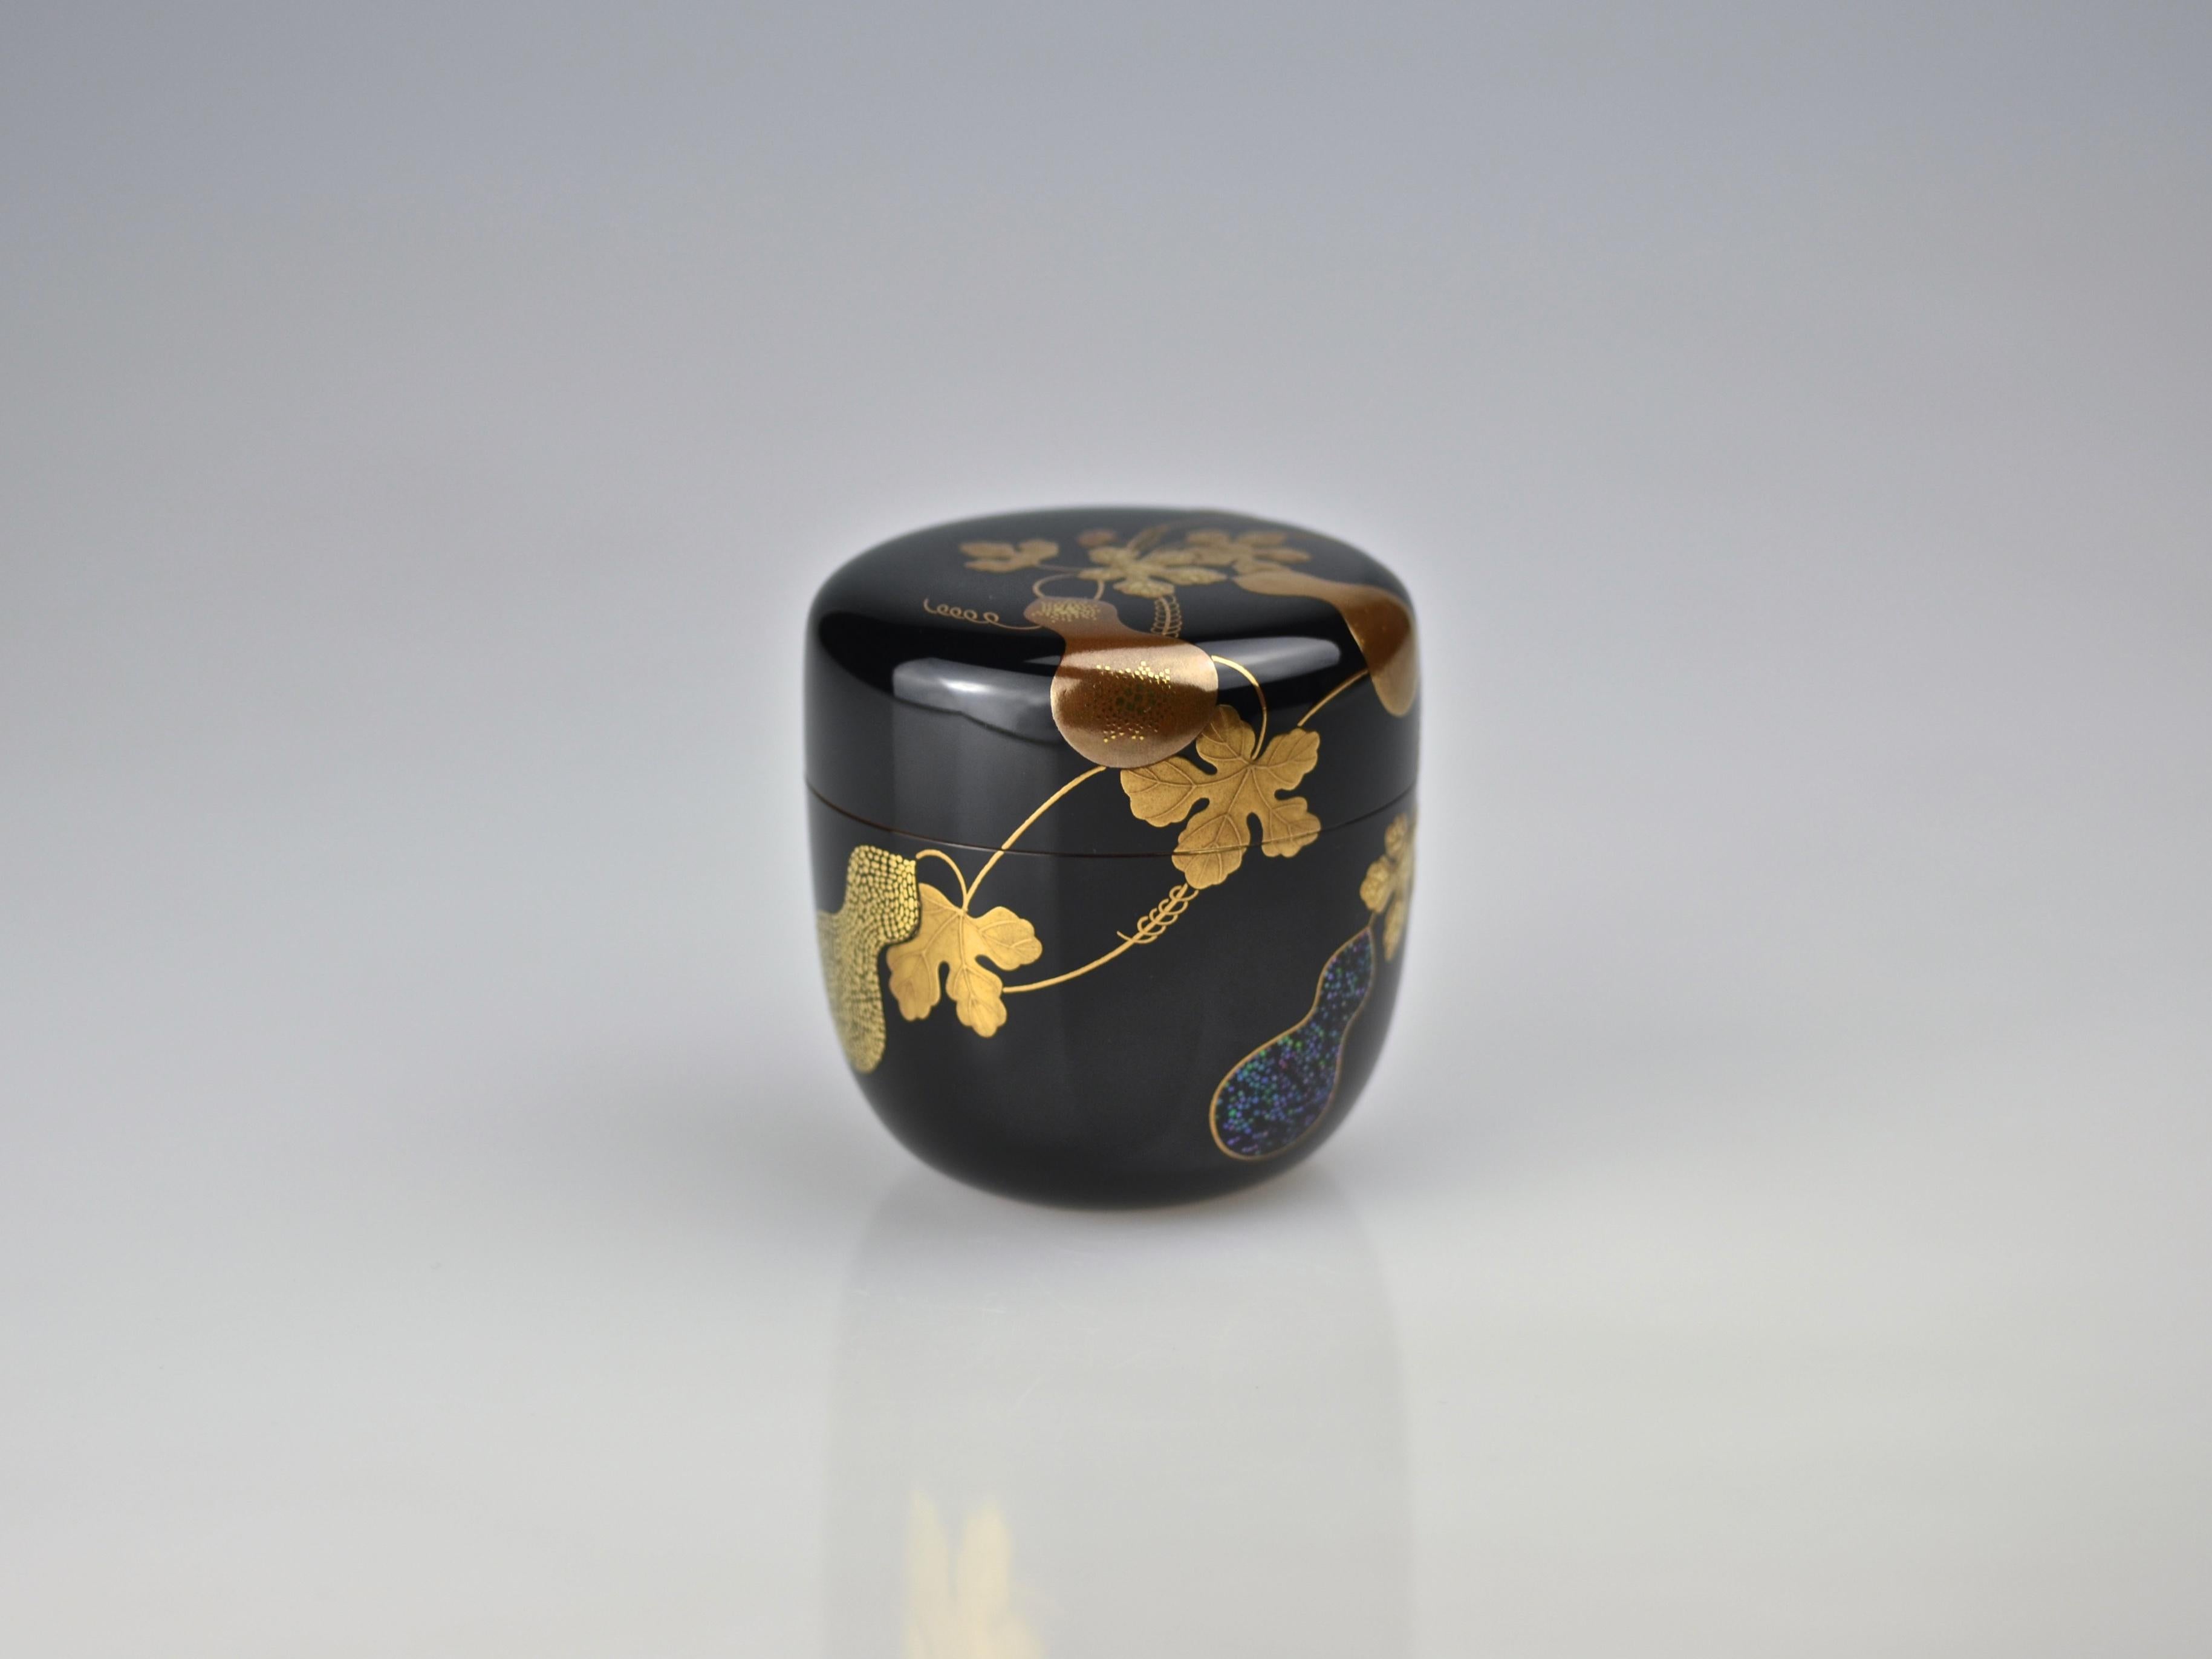 Excellent tea caddy (natsume) made by the 7th Ippyosai, Ippyo Eizo (1942). The exterior is finished in polished jet black lacquer (roiro) and decorated in gold maki-e with twines of gourds (hisago or hyotan). Gourds are the very symbol of the this